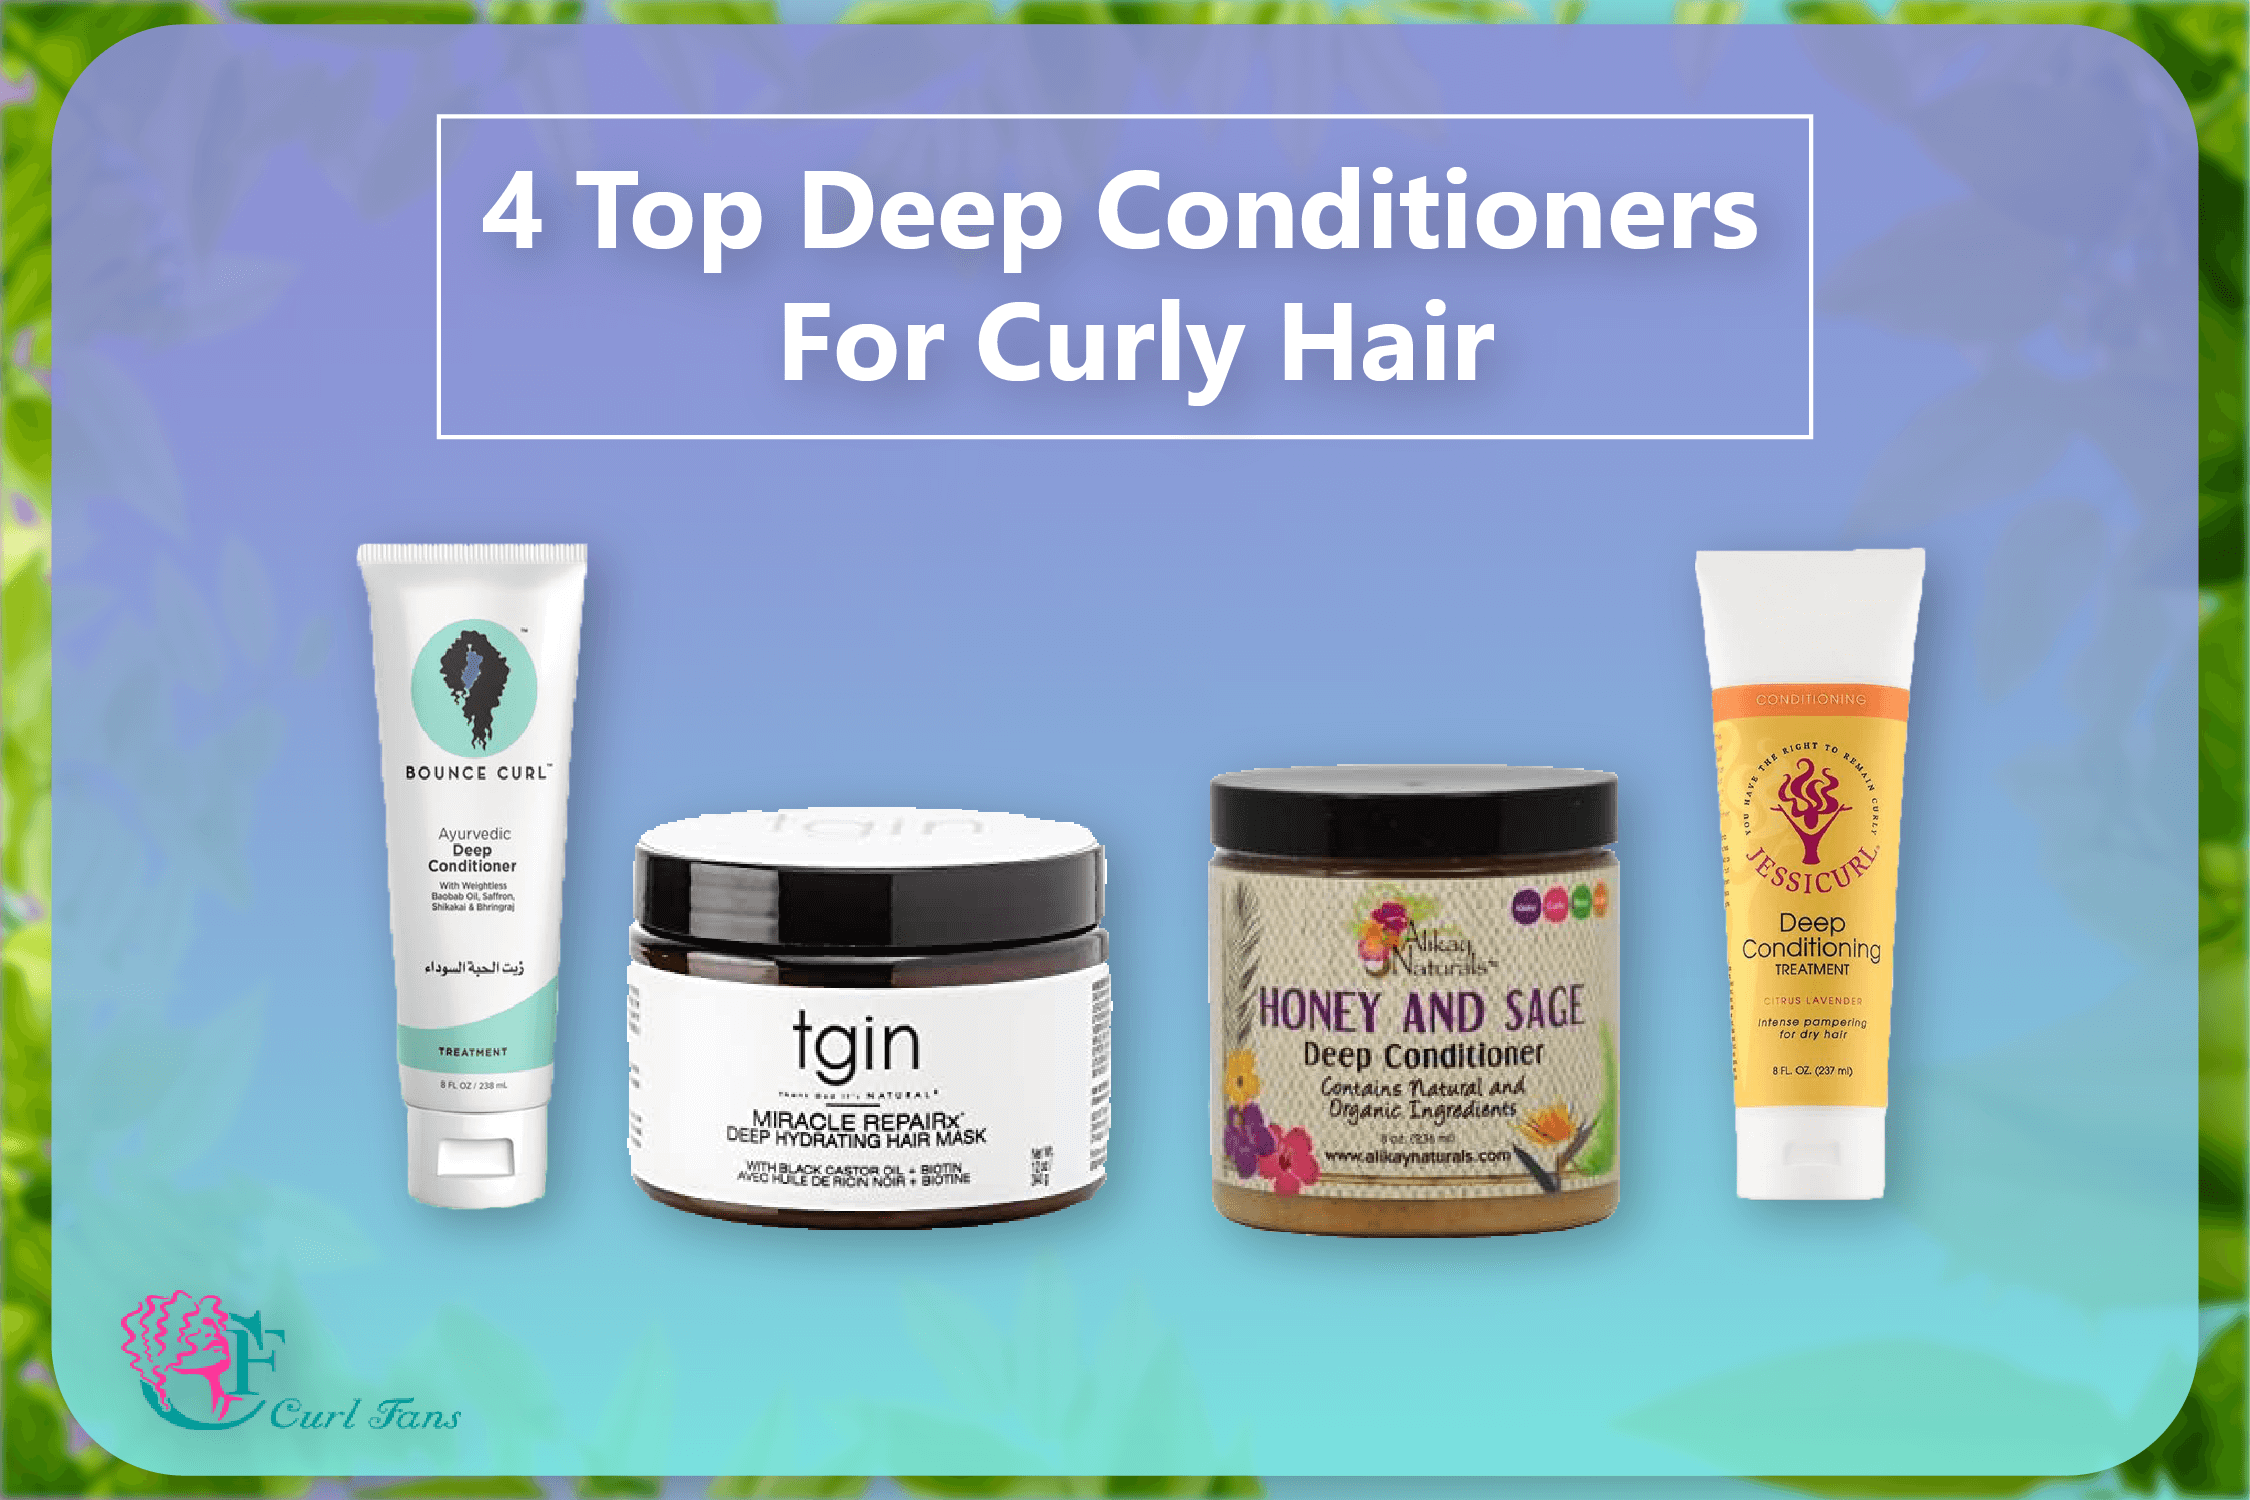 4 Top Deep Conditioners For Curly Hair - CurlFans - CurlyHair